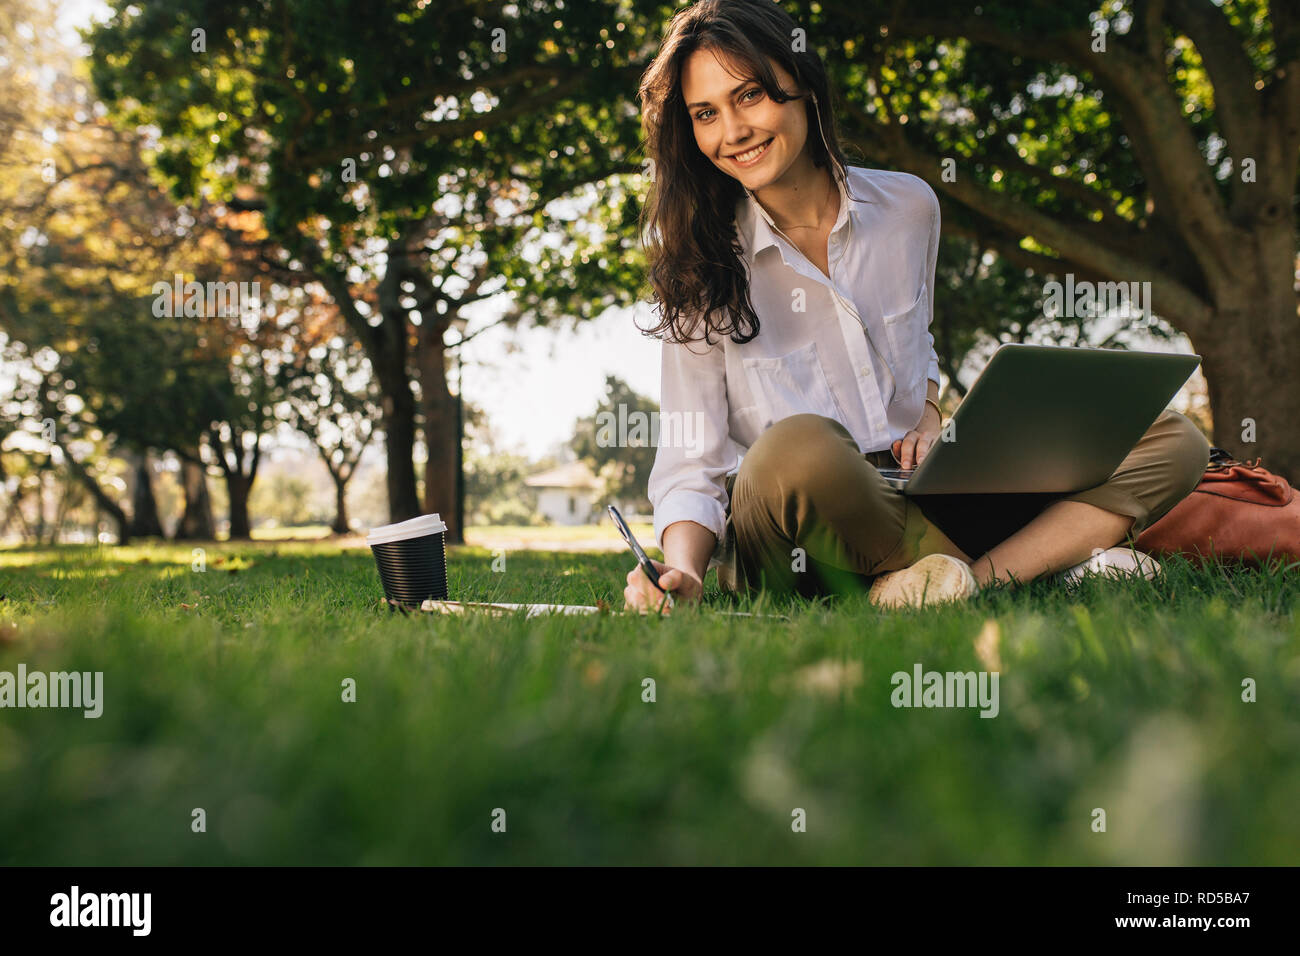 Freelancer working on laptop on green lawn in park. Beautiful woman with laptop looking at camera while working on laptop. Stock Photo